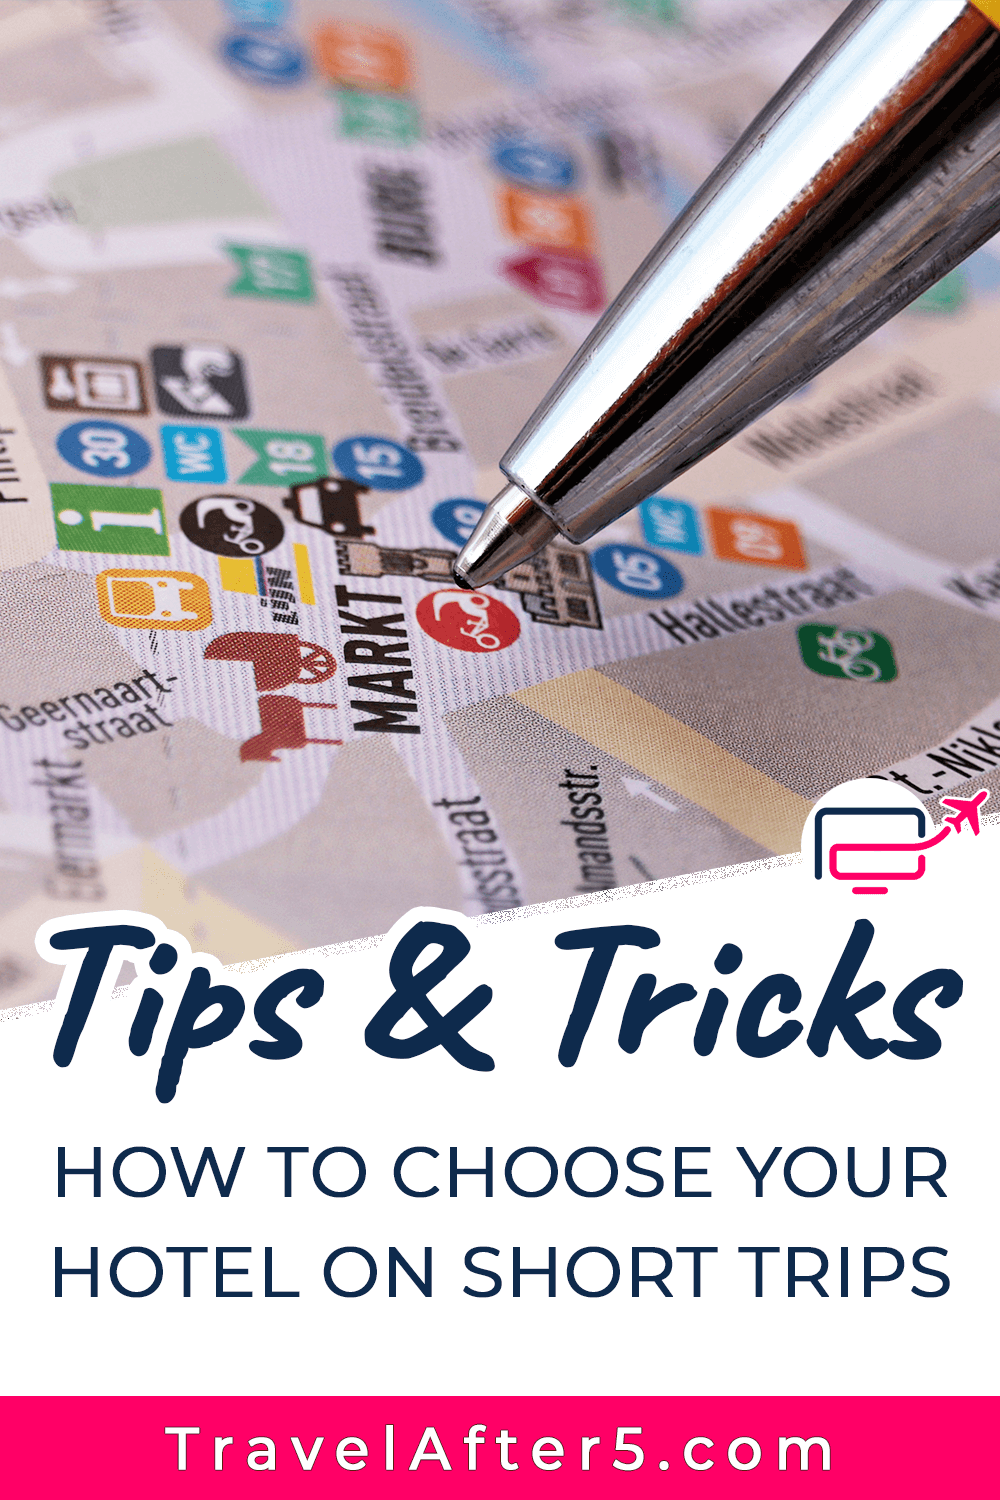 Pinterest Pin to Tips & Tricks: How to Choose Your Hotel on Short Trips, by Travel After 5